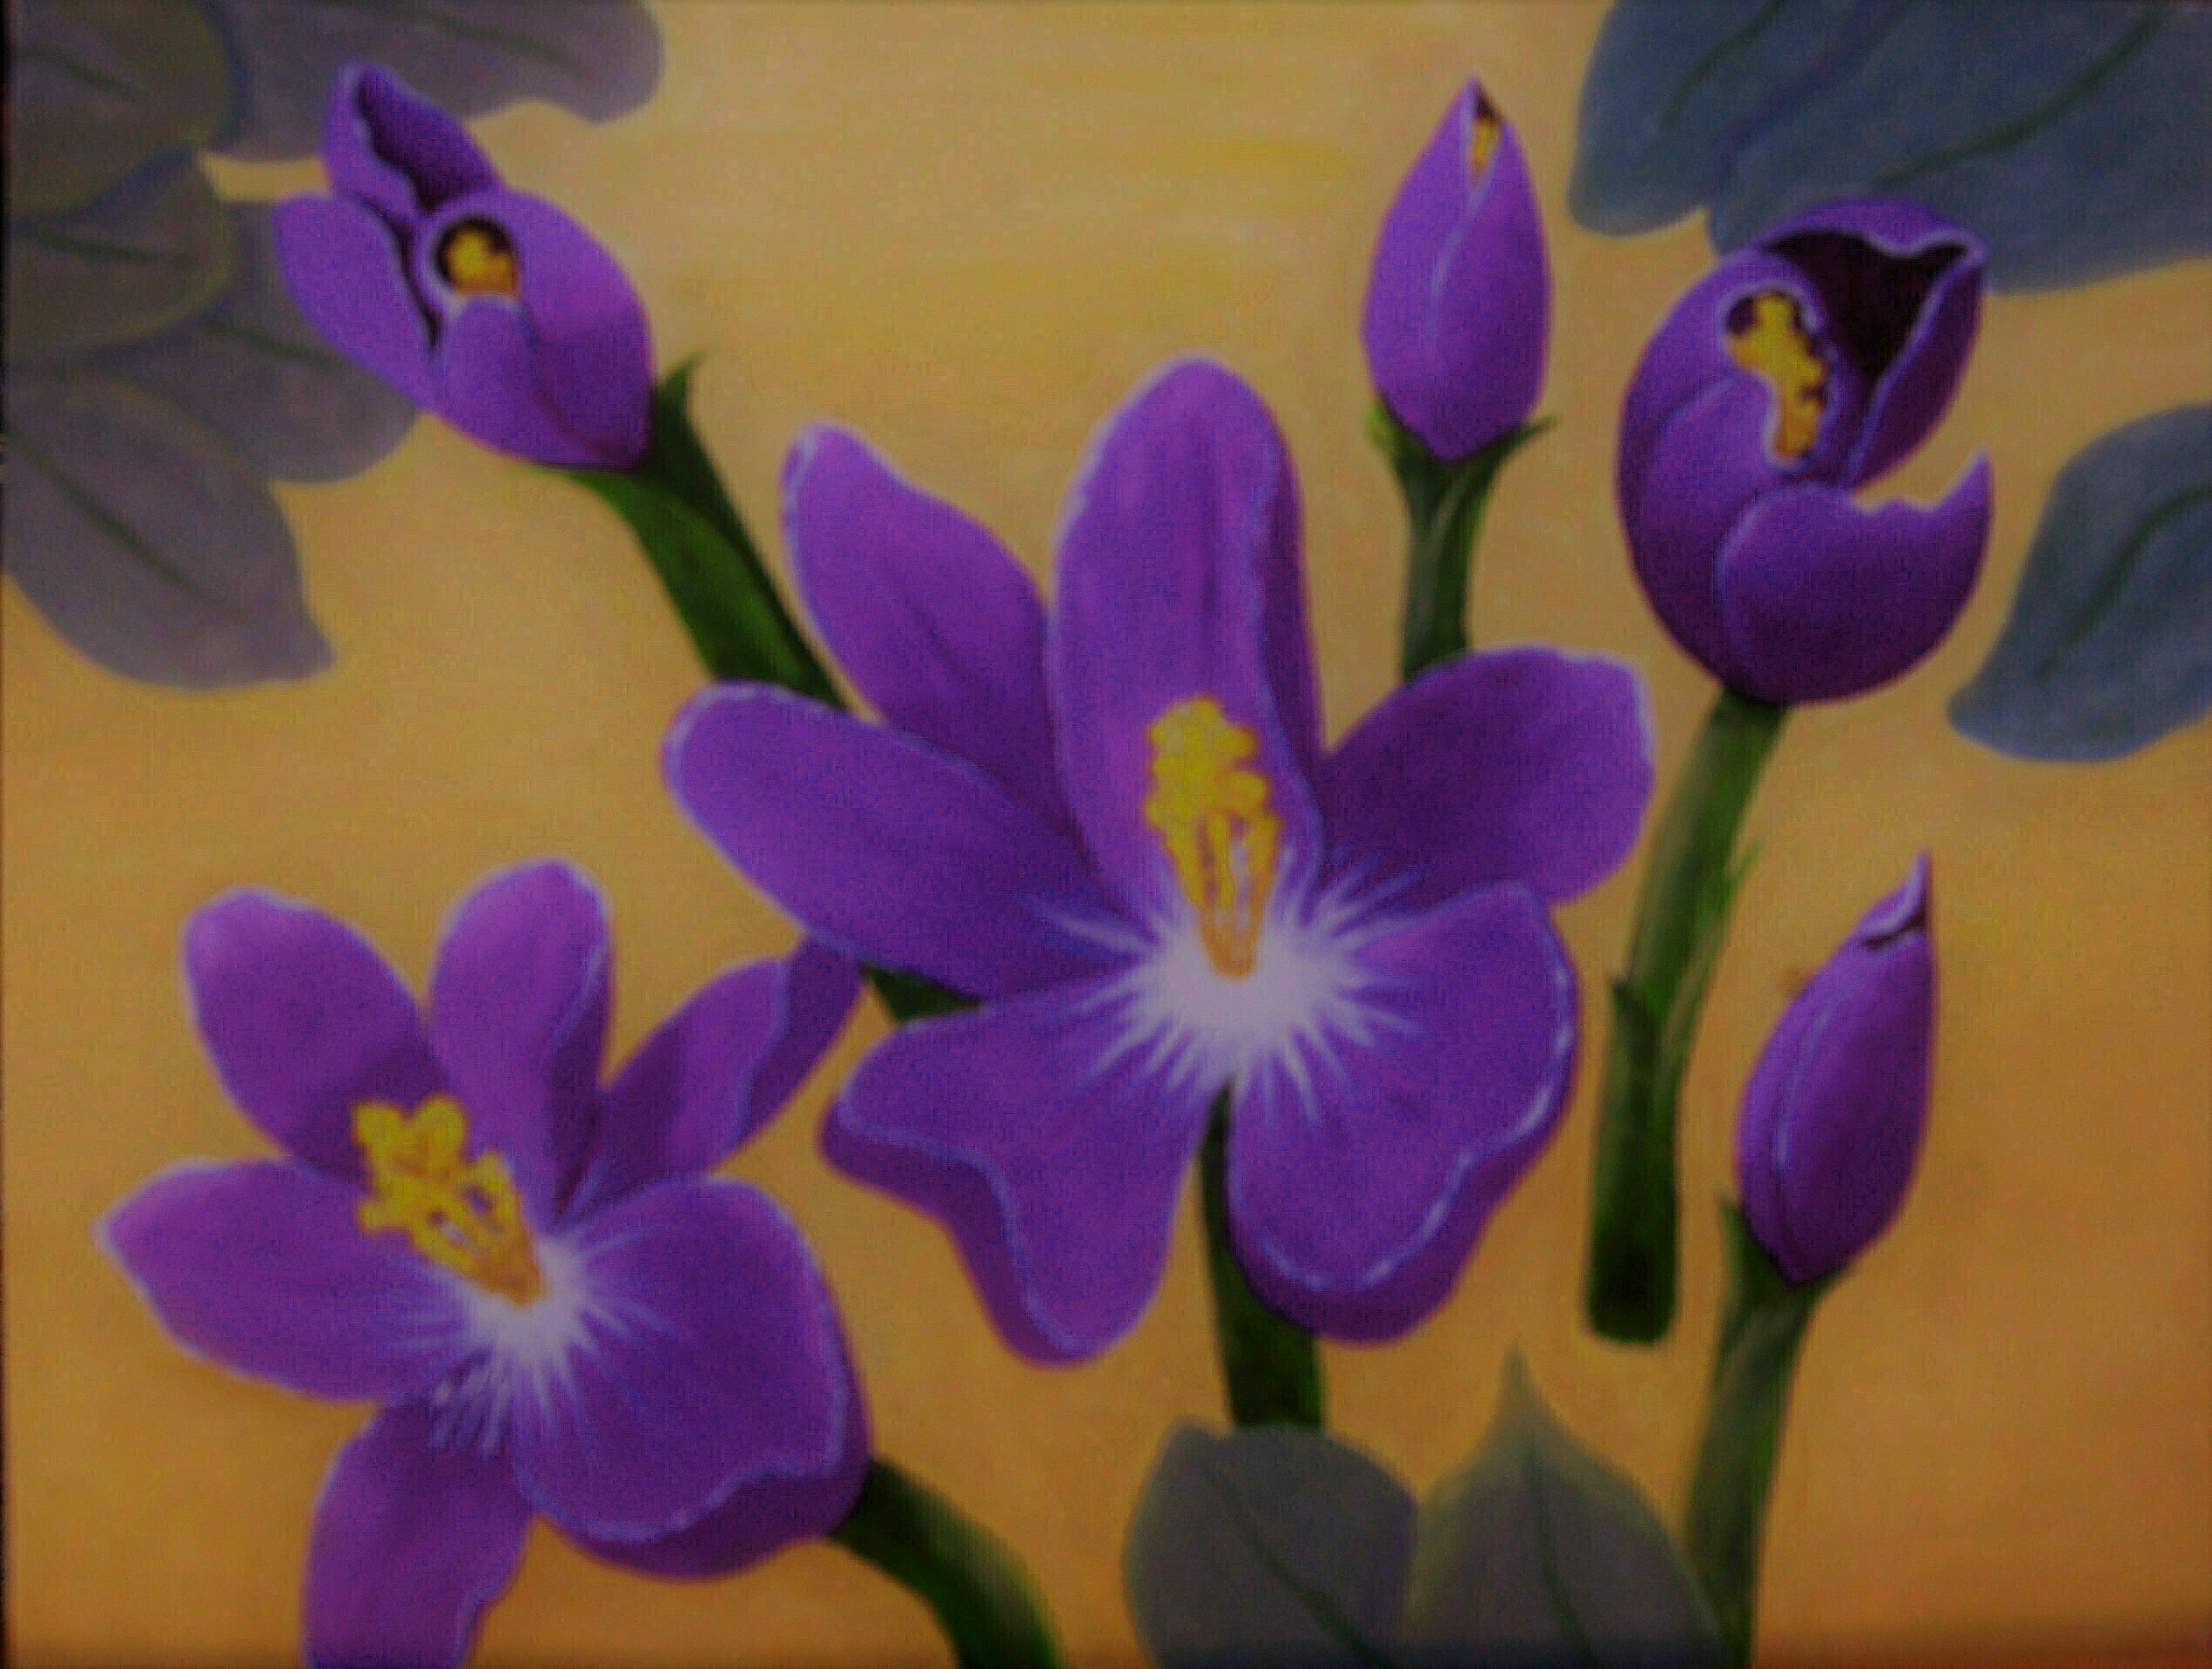 Lora Vannoord; Crocus Flowers, 2019, Original Painting Oil, 14 x 11 inches. Artwork description: 241 Original oil painting of purple crocus flowers with a very light yellow ochra background that is close to yellow but mellow.  Real wood frame included. ...